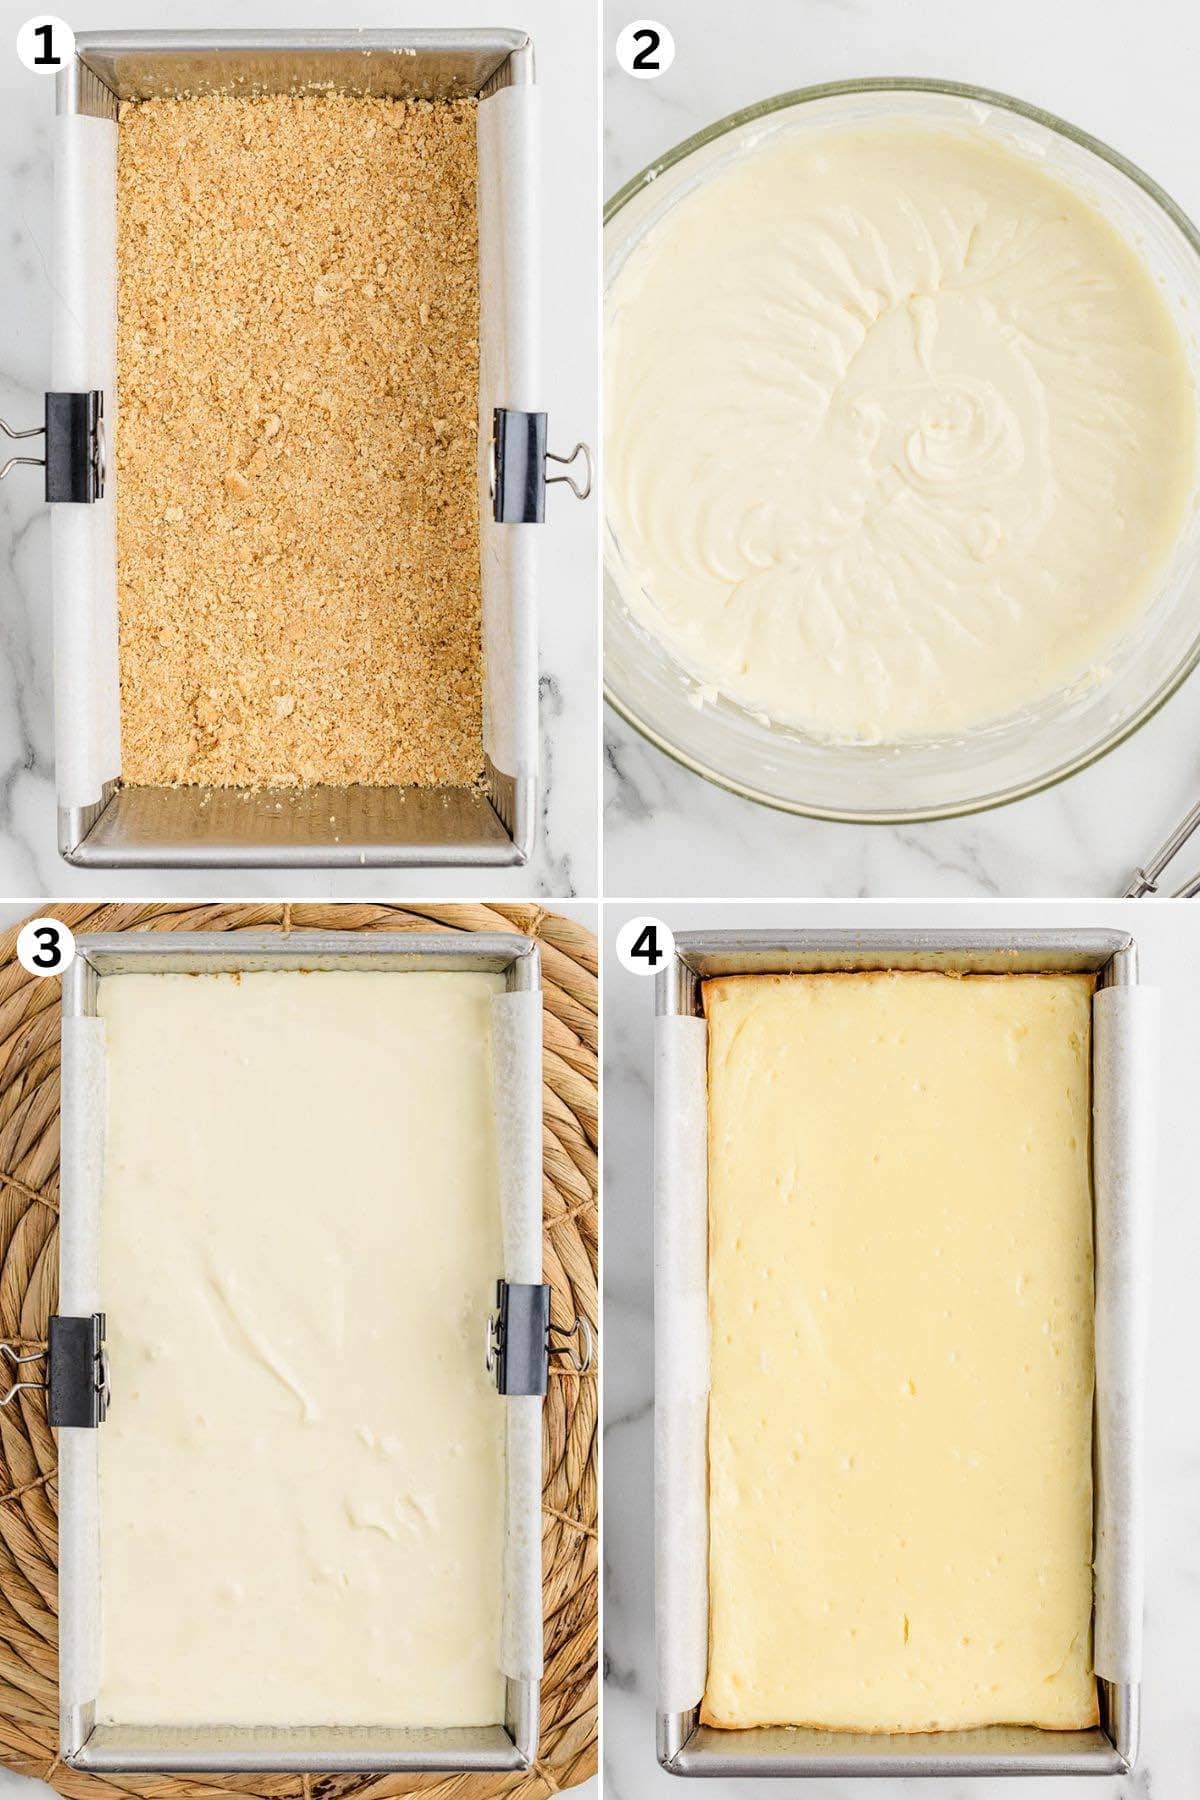 Press the crust mixture into the bottom of the loaf pan to form the crust. In a mixing bowl, mix all cheesecake ingredients. Pour the batter over the crust then bake. Chill the cheesecake.